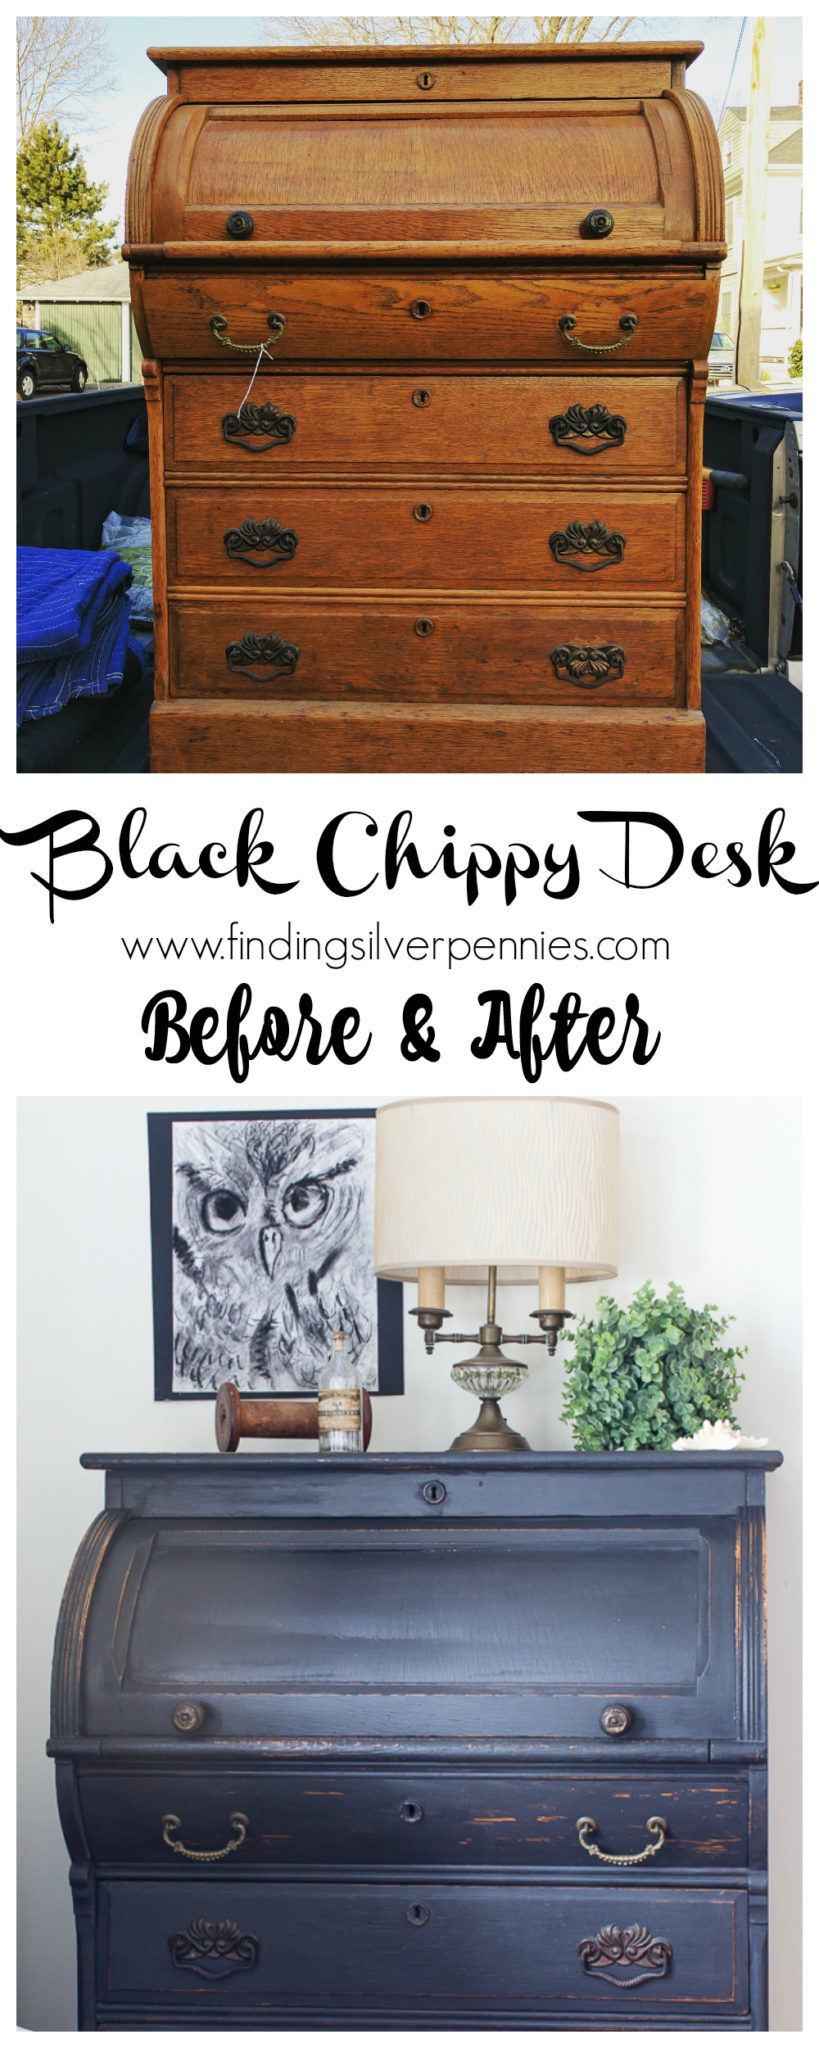 A Black Chippy Roll Top Desk Finding Silver Pennies